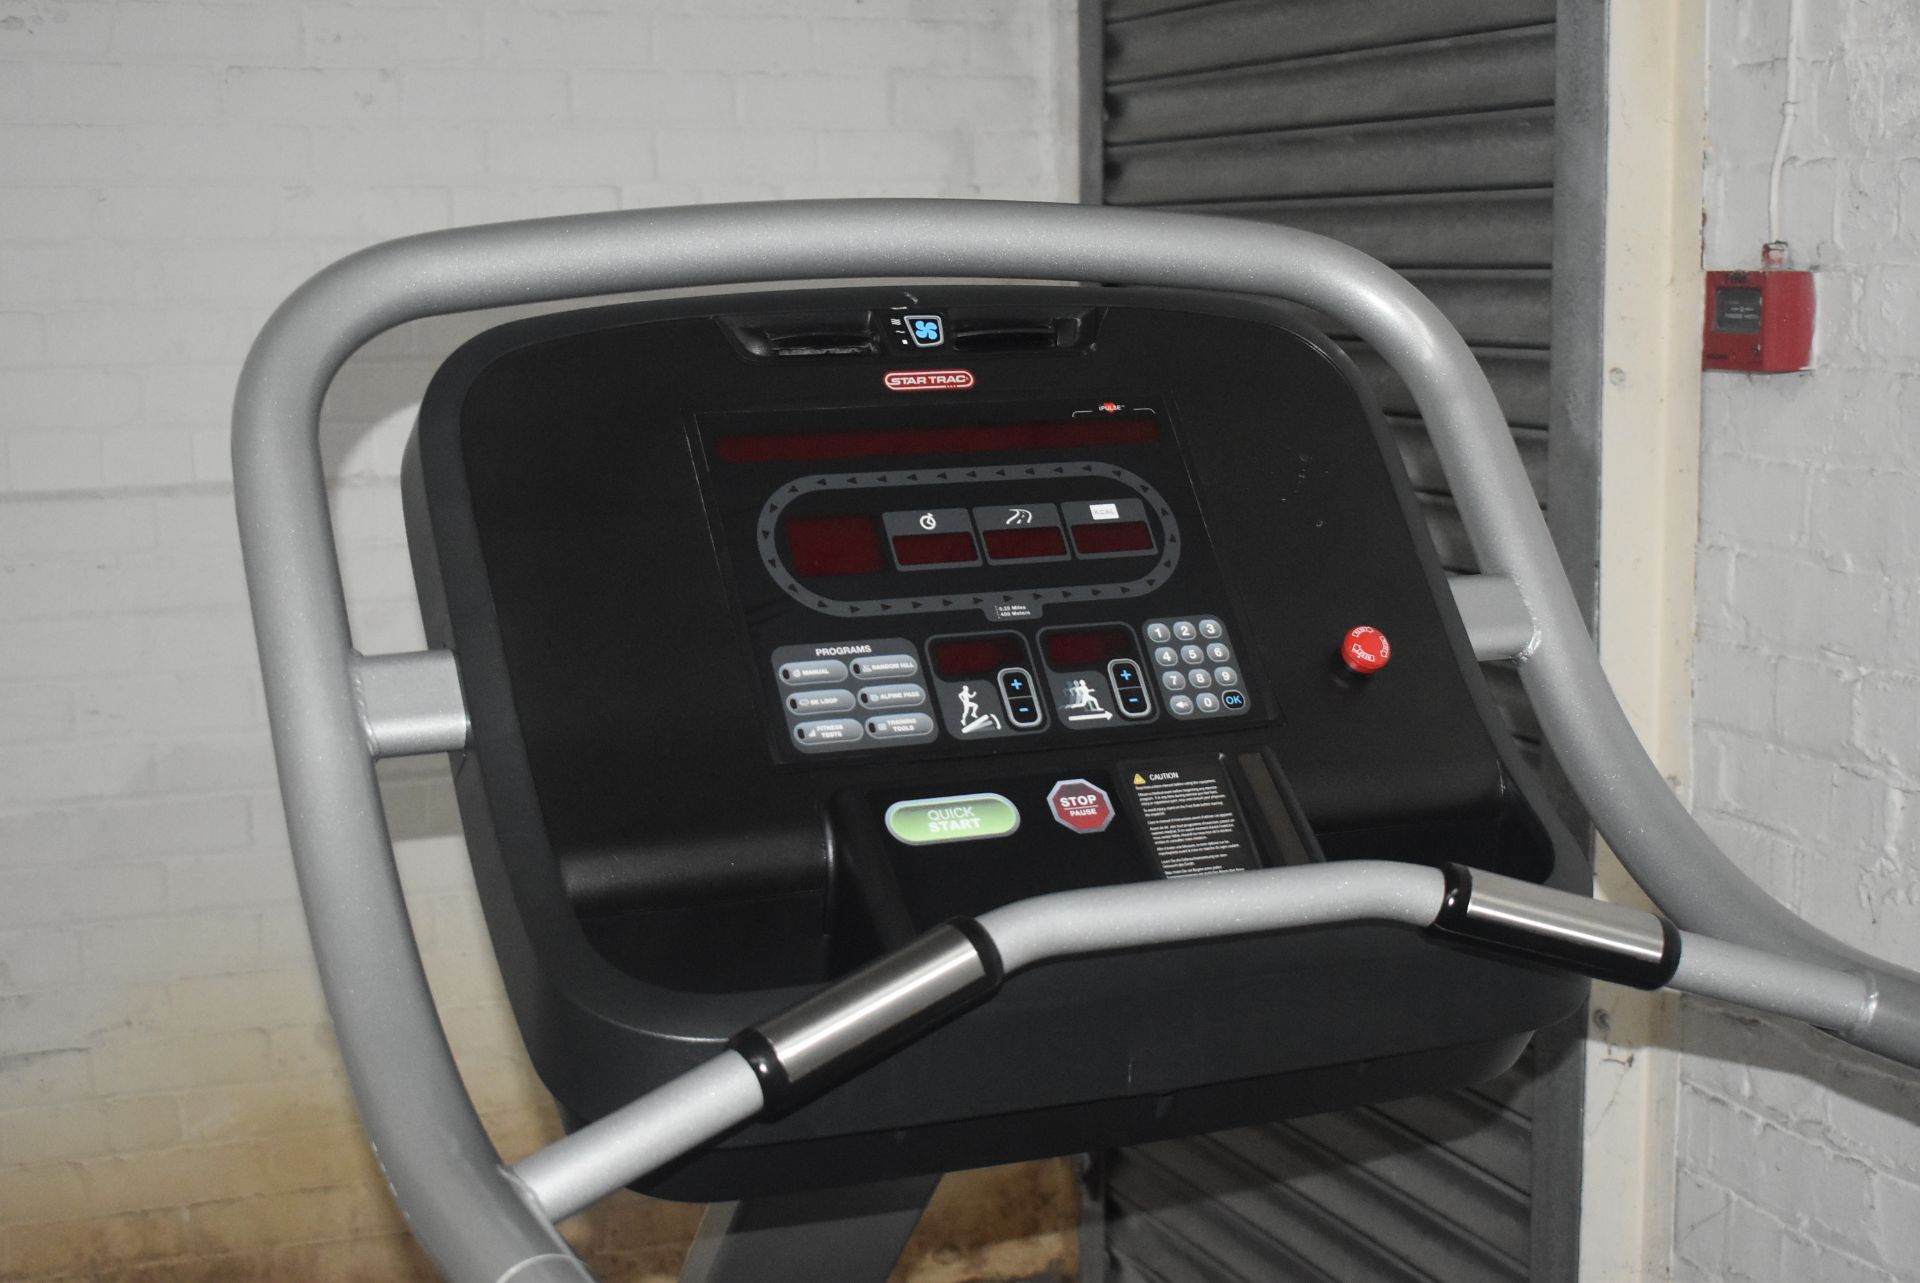 1 x Star Trac Commercial Excercise Treadmill With Uphill Feature - CL011 - Location: Altrincham WA14 - Image 5 of 8